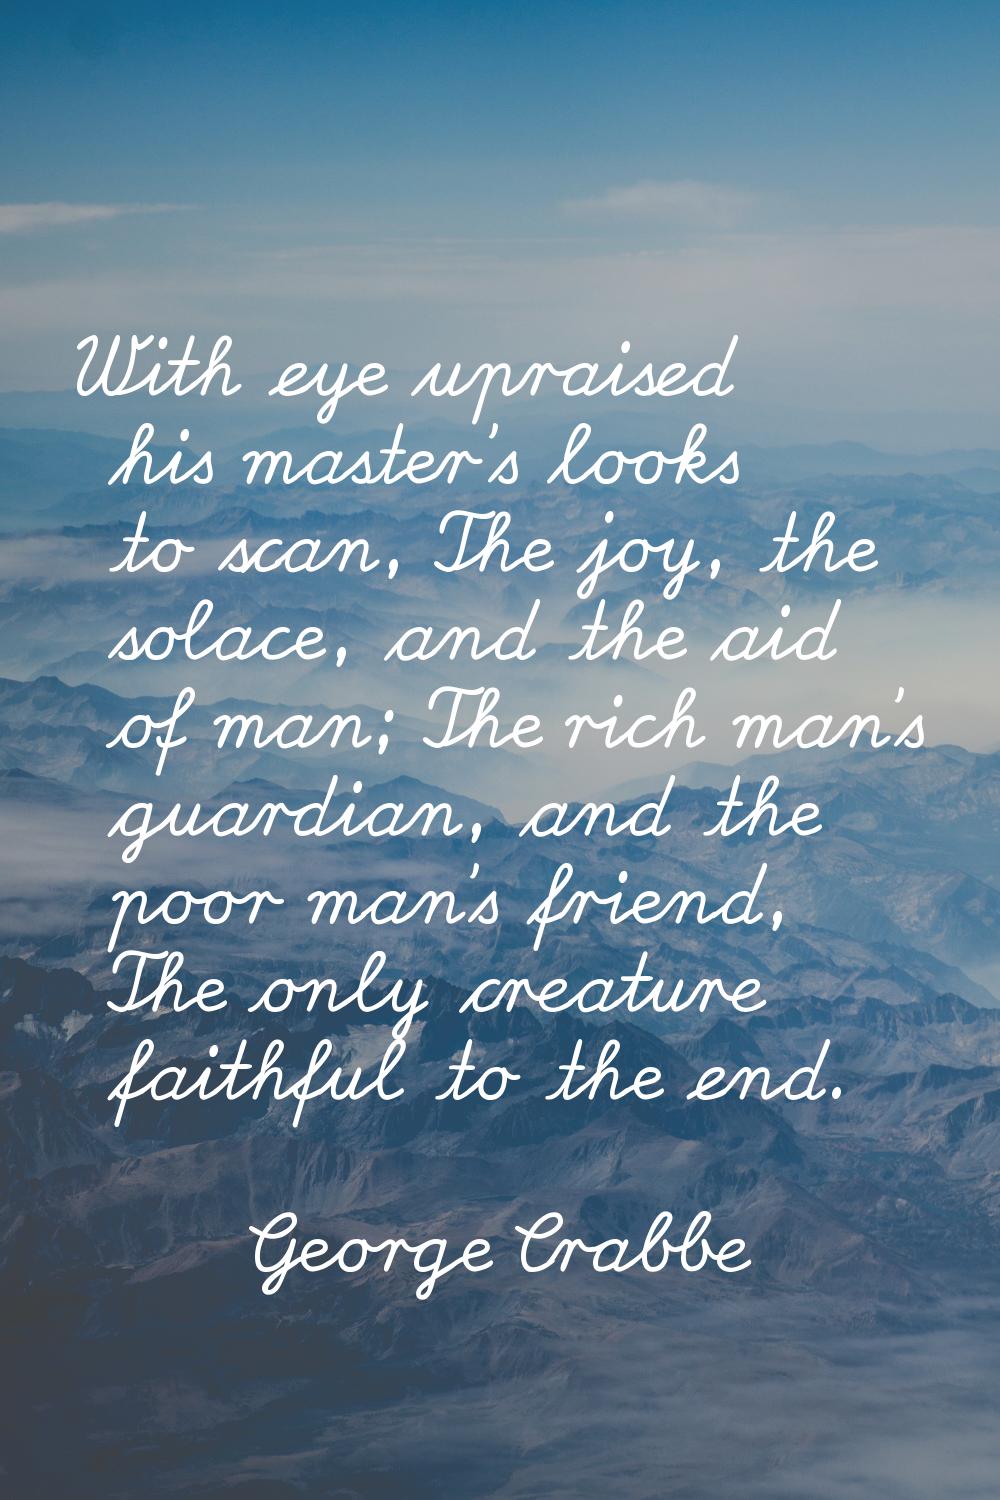 With eye upraised his master's looks to scan, The joy, the solace, and the aid of man; The rich man